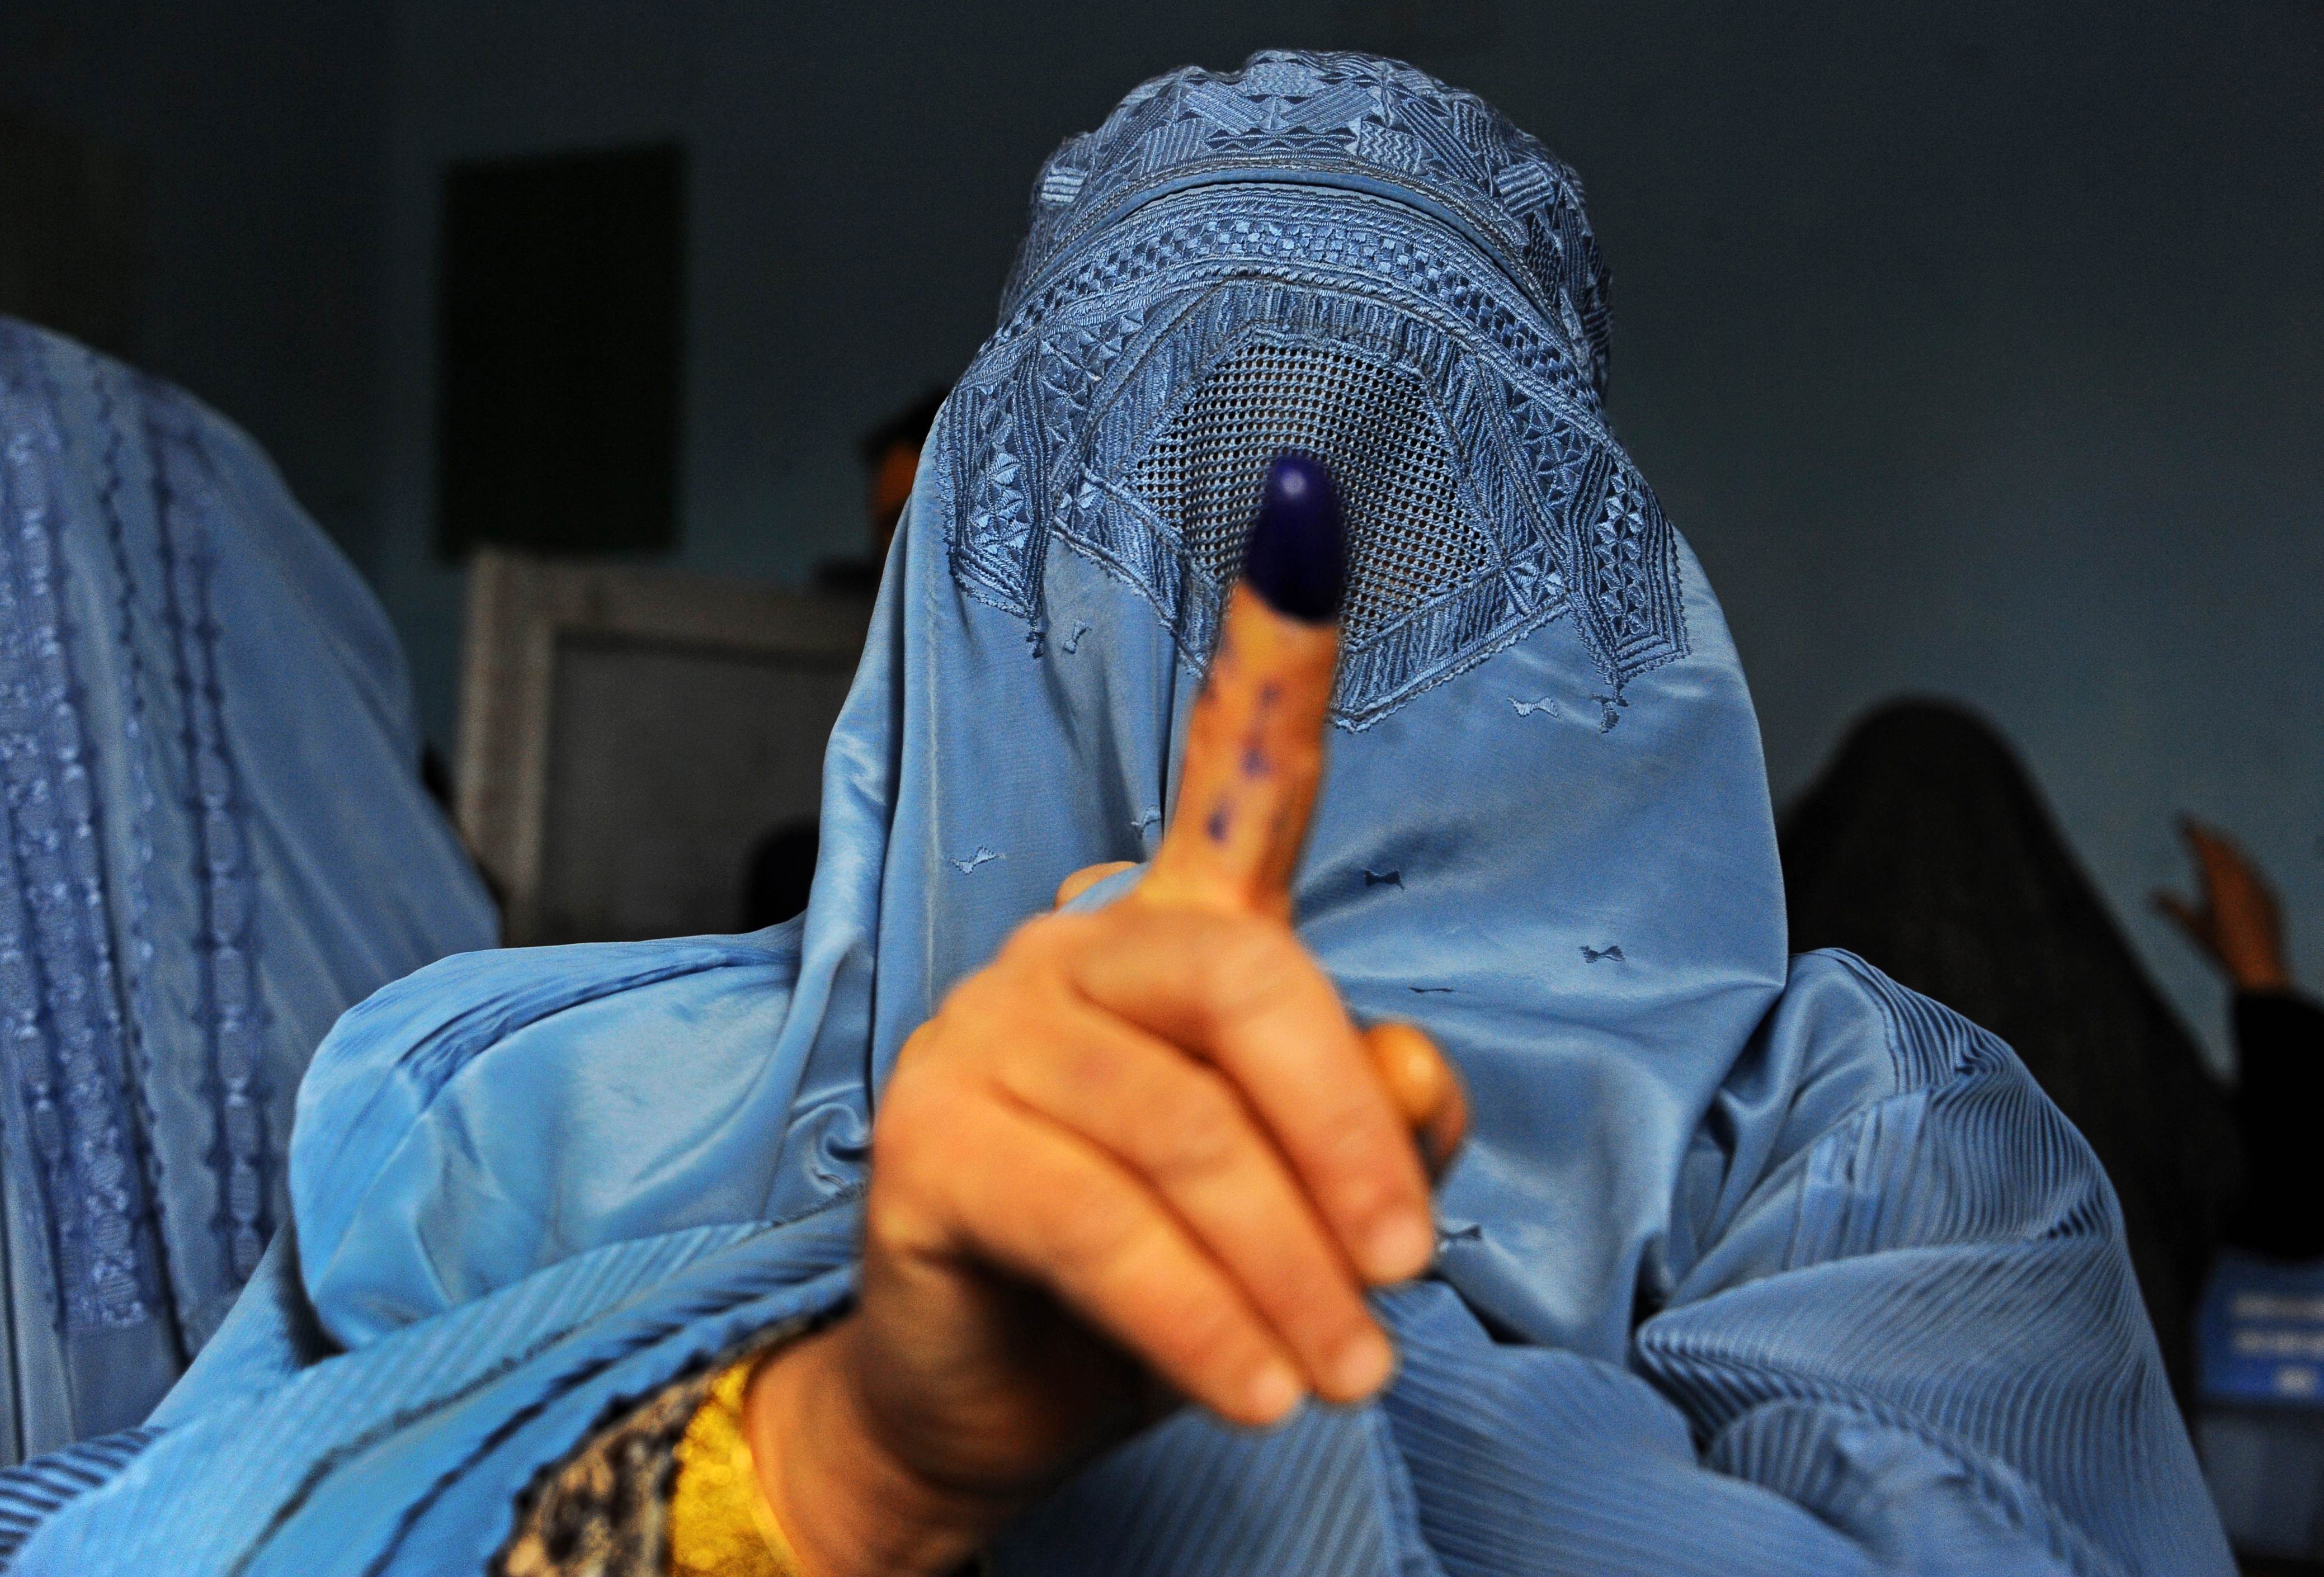 An Afghan woman shows her inked finger after voting at a polling station in the northwestern city of Herat on Saturday. Photo: EPA